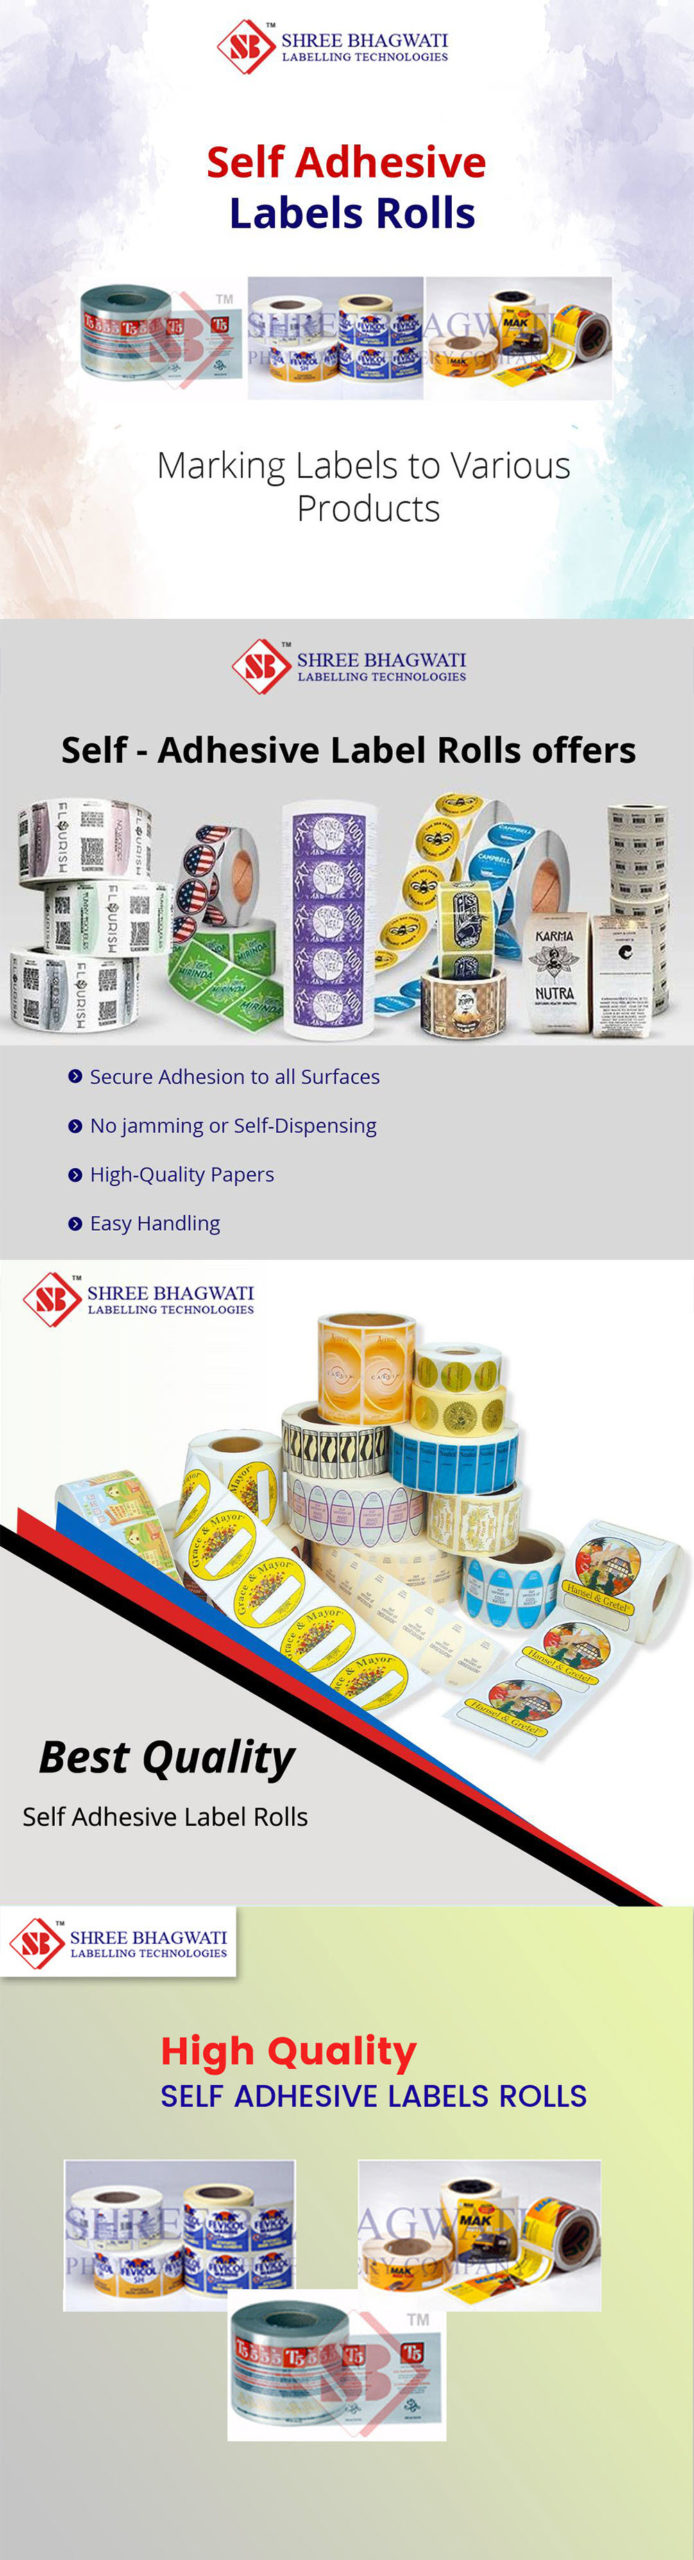 Why Indian Label Roll Manufacturers are Best?